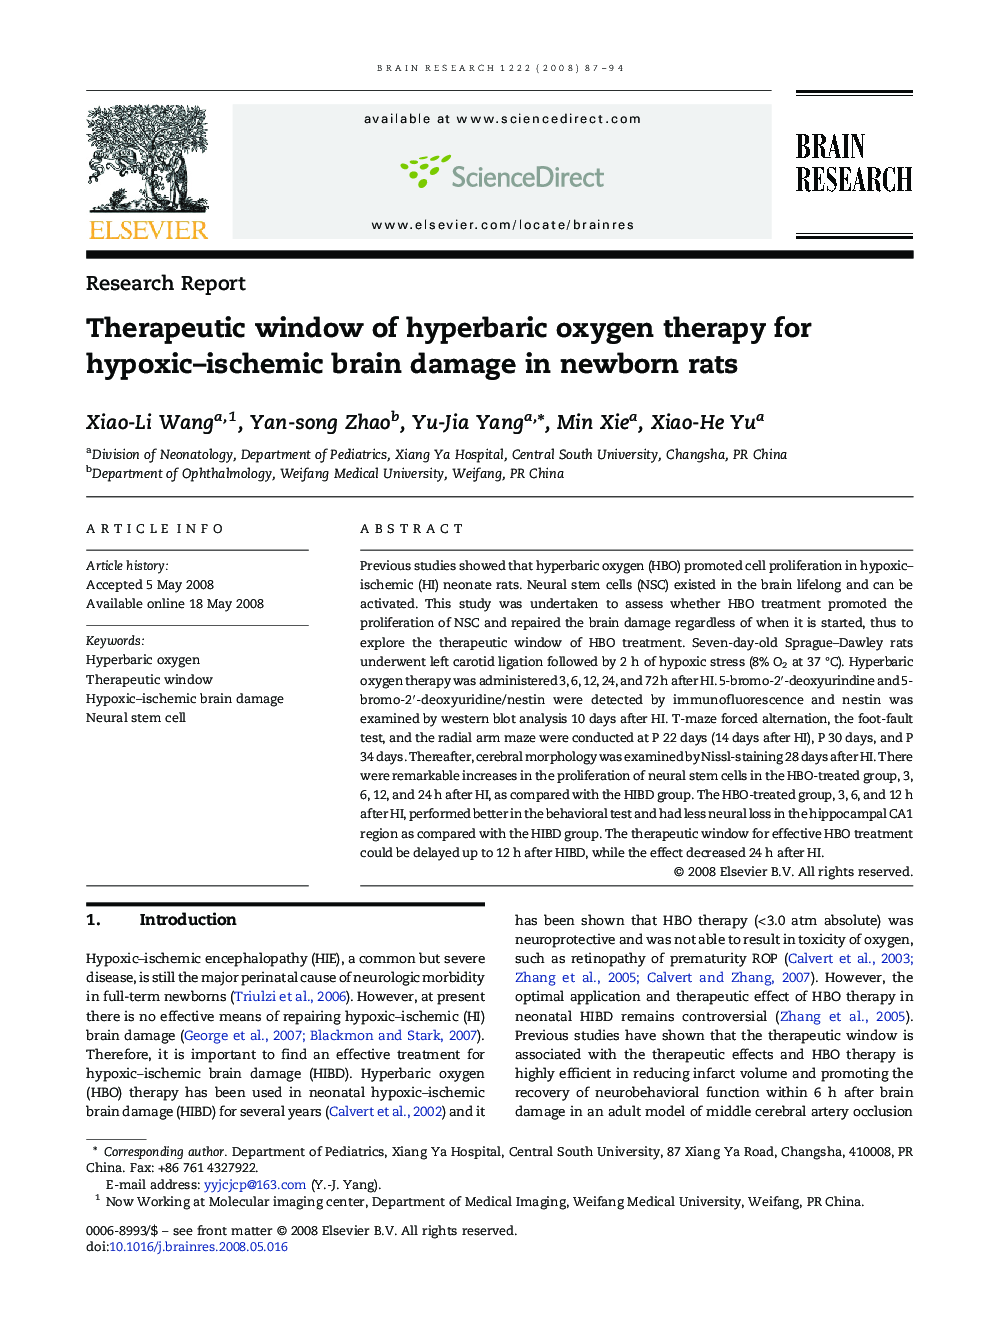 Therapeutic window of hyperbaric oxygen therapy for hypoxic-ischemic brain damage in newborn rats